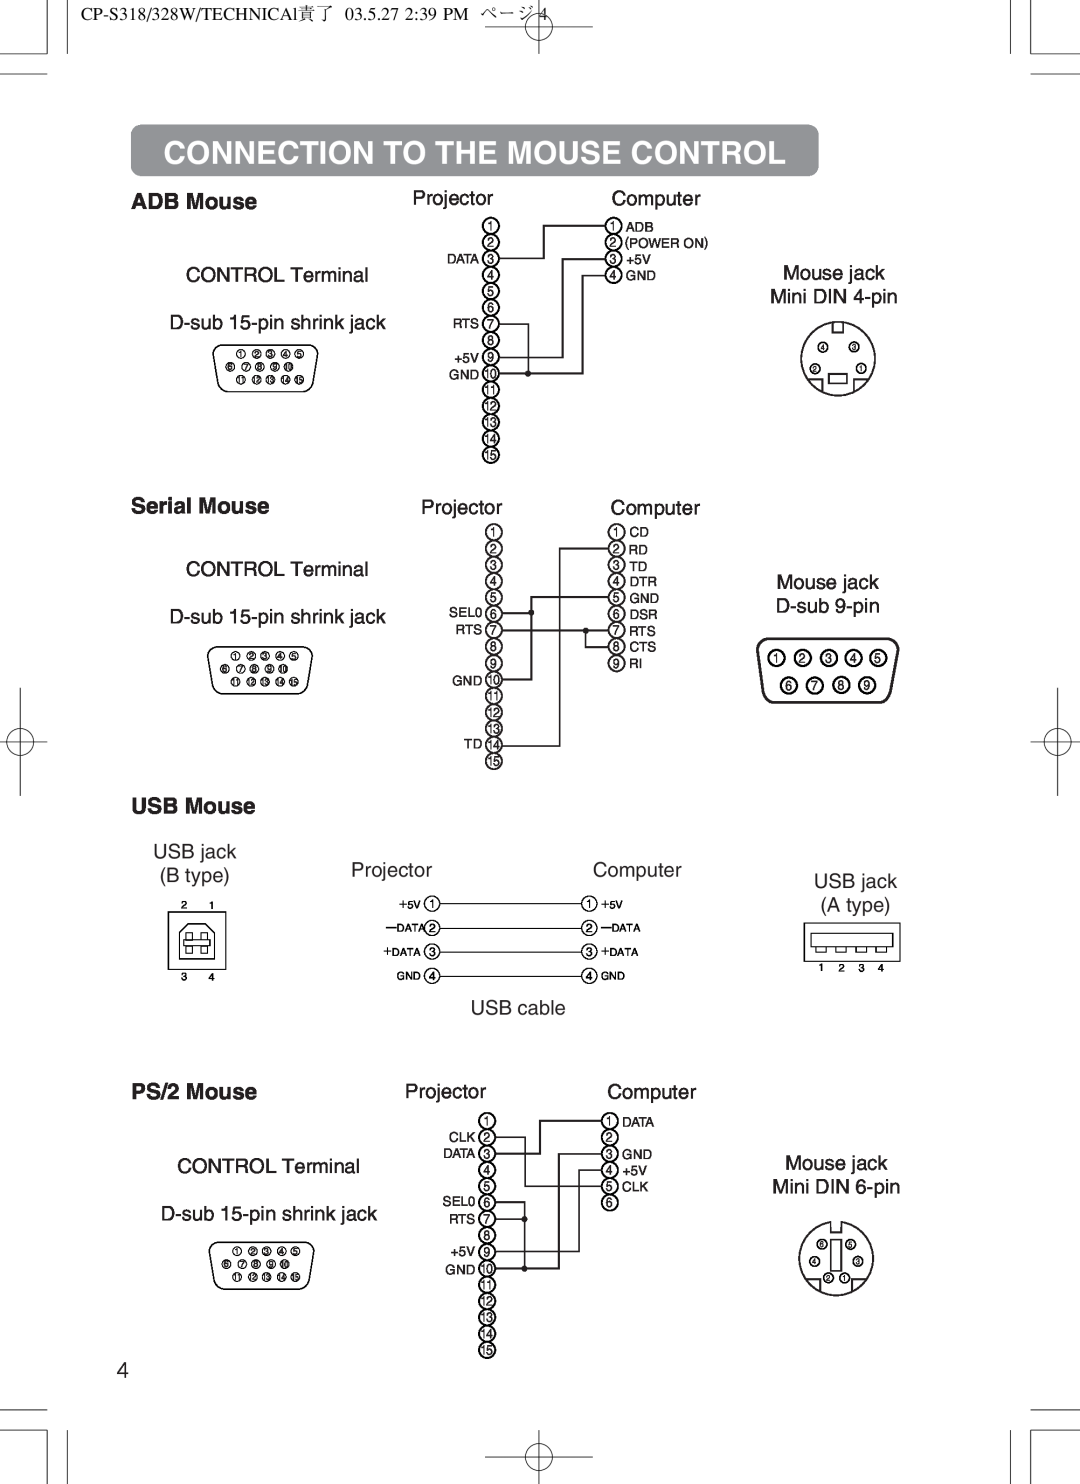 Hitachi cp-s318 user manual Connection To The Mouse Control, ADB Mouse, USB Mouse, PS/2 Mouse 